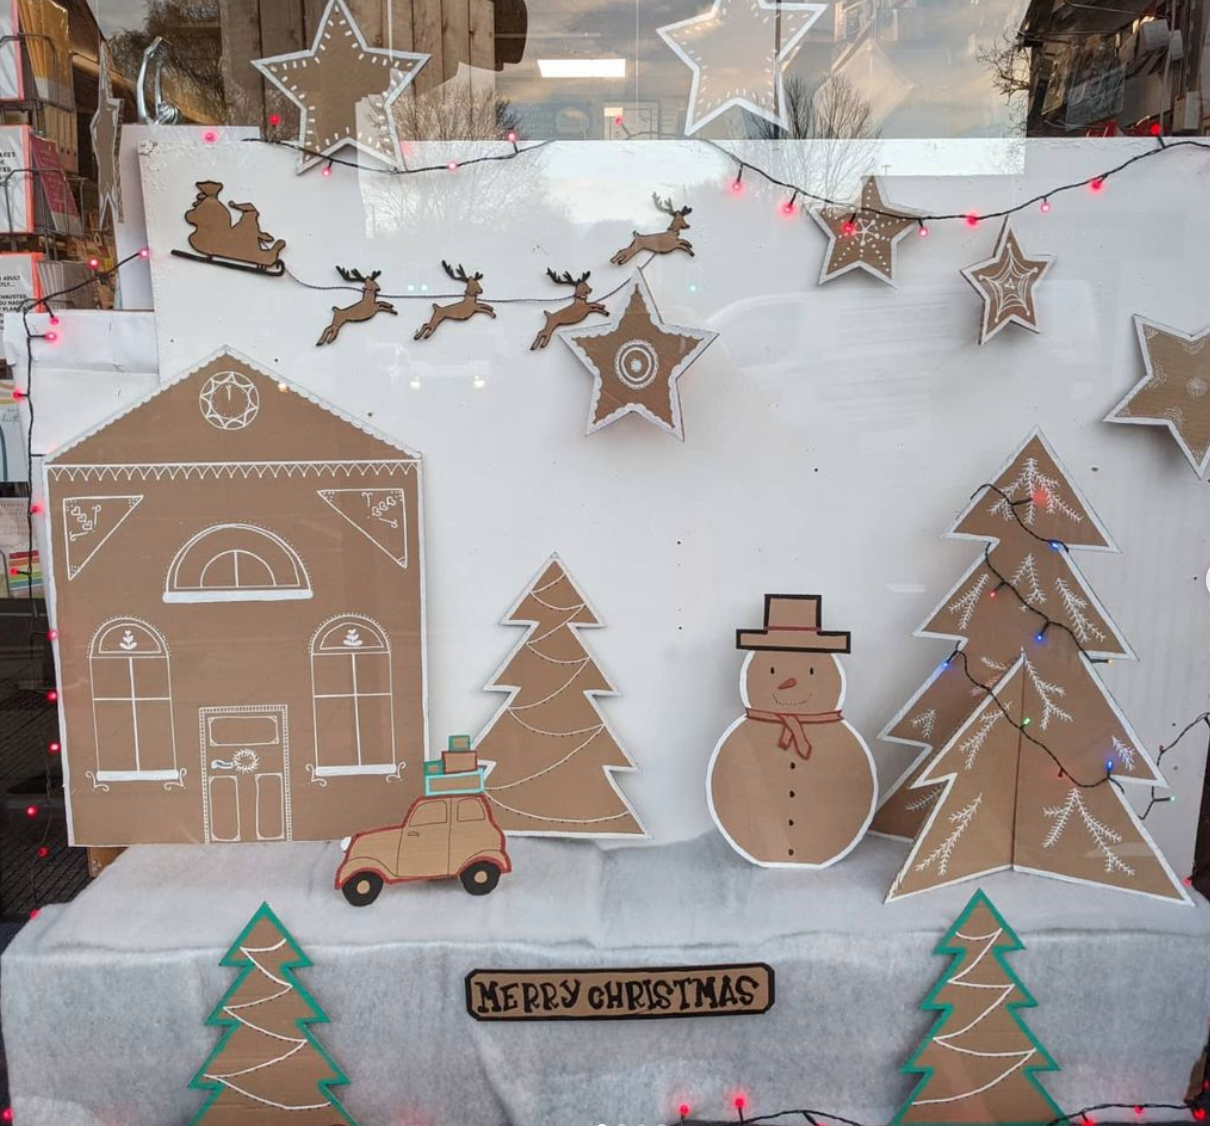 Above: A sustainable themed Christmas window in Stationery Supplies.